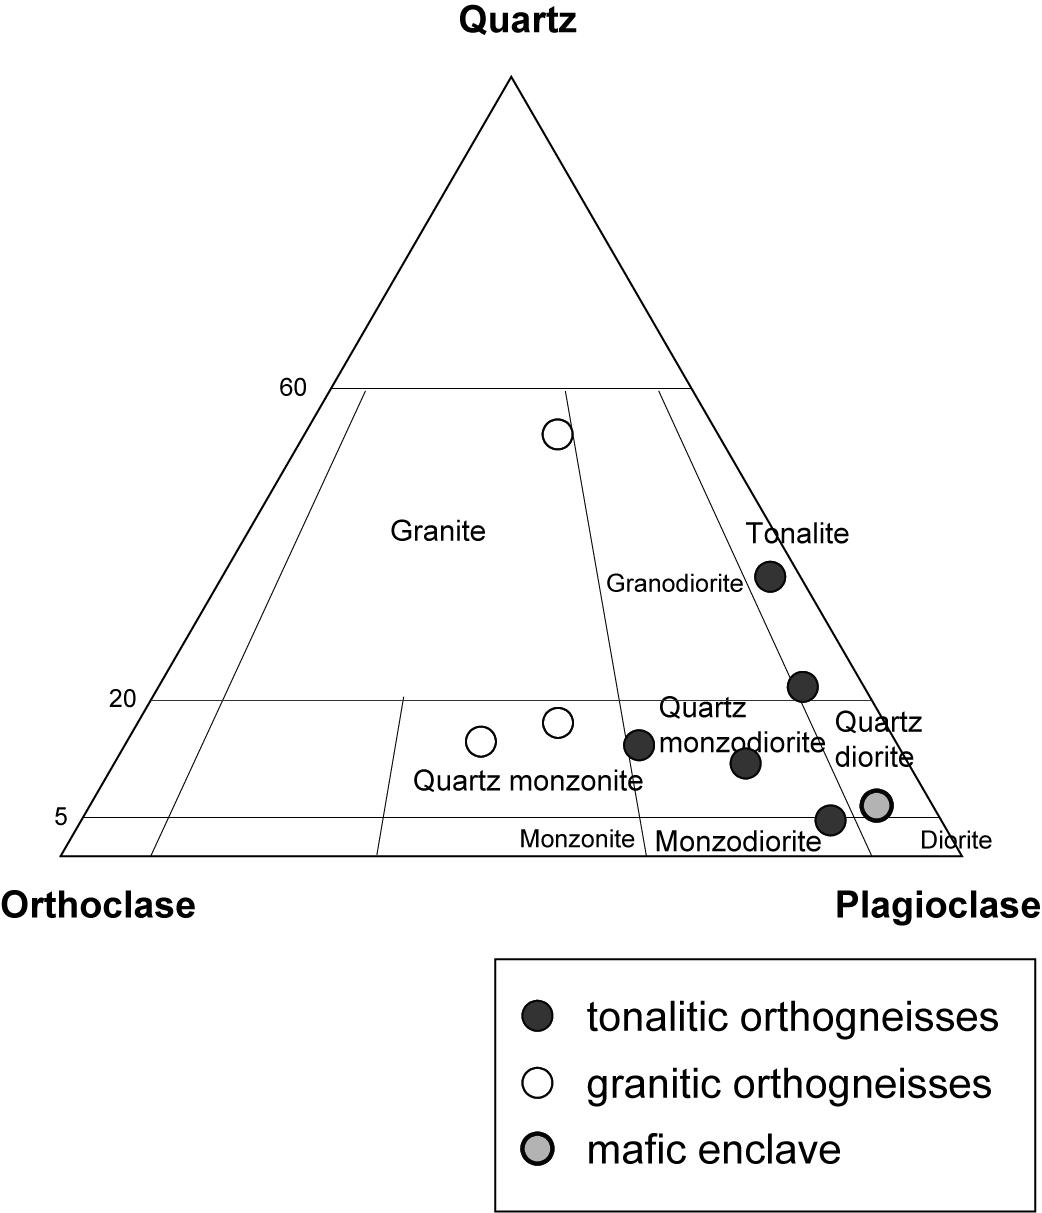 Normative quartz–orthoclase–plagioc lase composition diagram(after Streckeisen, 1976) forthe Middle Paleozoic orthogneisses from the Wolhyeonri complex.